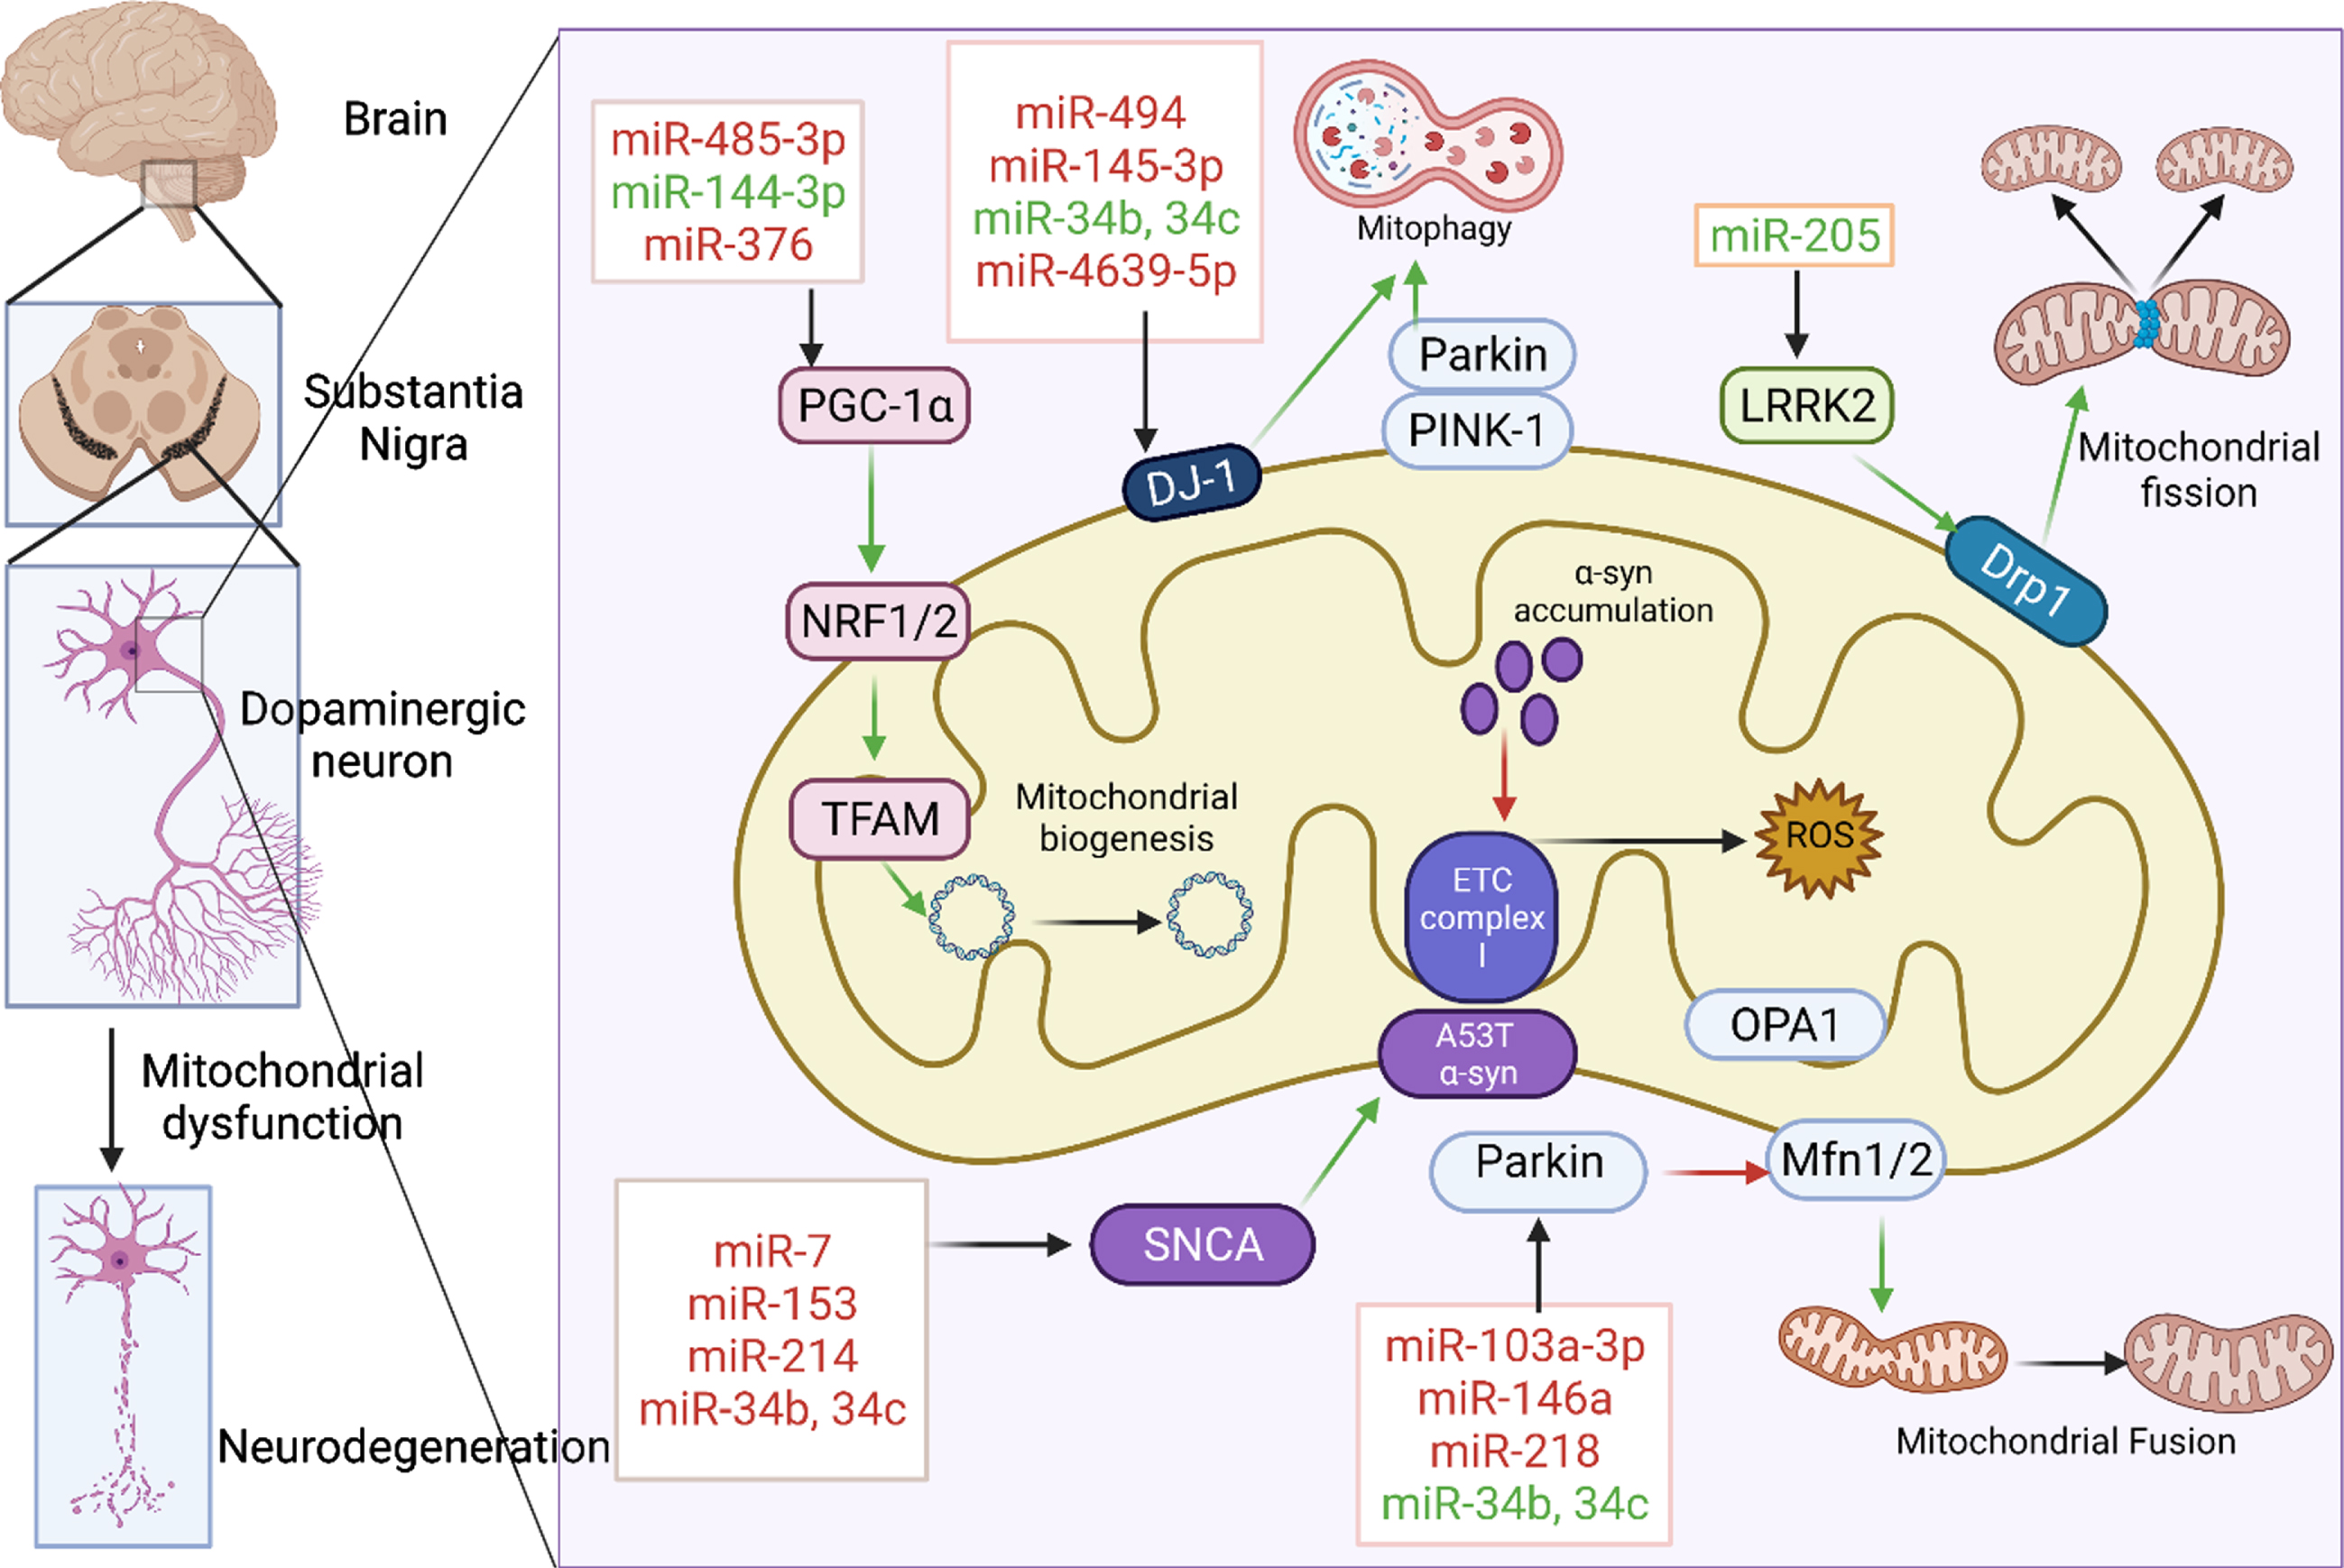 miRNAs associated with mitochondrial dysfunction in PD. Various miRNAs were involved in the regulation of mitochondrial biogenesis, mitochondrial fission, fusion, mitophagy, electron transport chain by targeting key proteins like PGC-1α, LRRK2, PINK 1, Parkin, DJ-1, and SNCA. miRNAs in red are those that downregulate their respective target whereas those in green upregulate them. Green and red arrows indicate stimulation and inhibition of downstream pathway respectively. Created with BioRender.com.